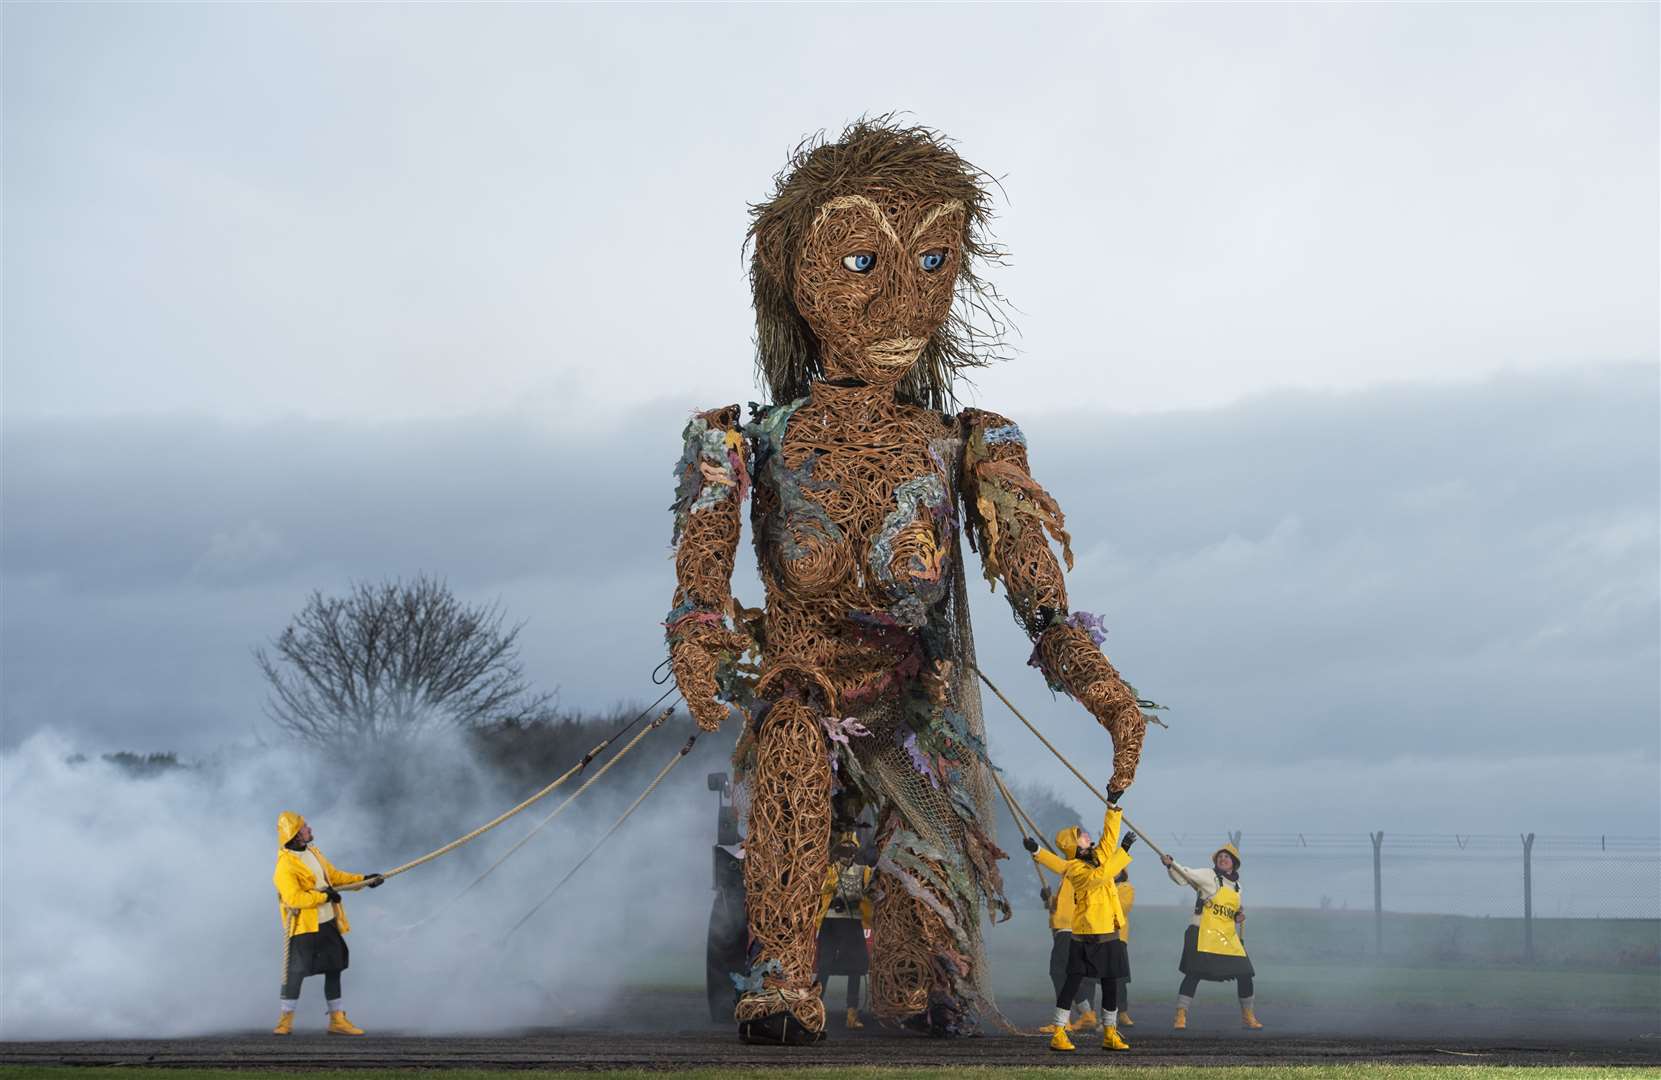 Storm, the 10-metre tall puppet operated by eight puppeteers, will make a special appearance in Nairn as part of this year's Book and Arts Festival. Picture: Neil Hanna Photography